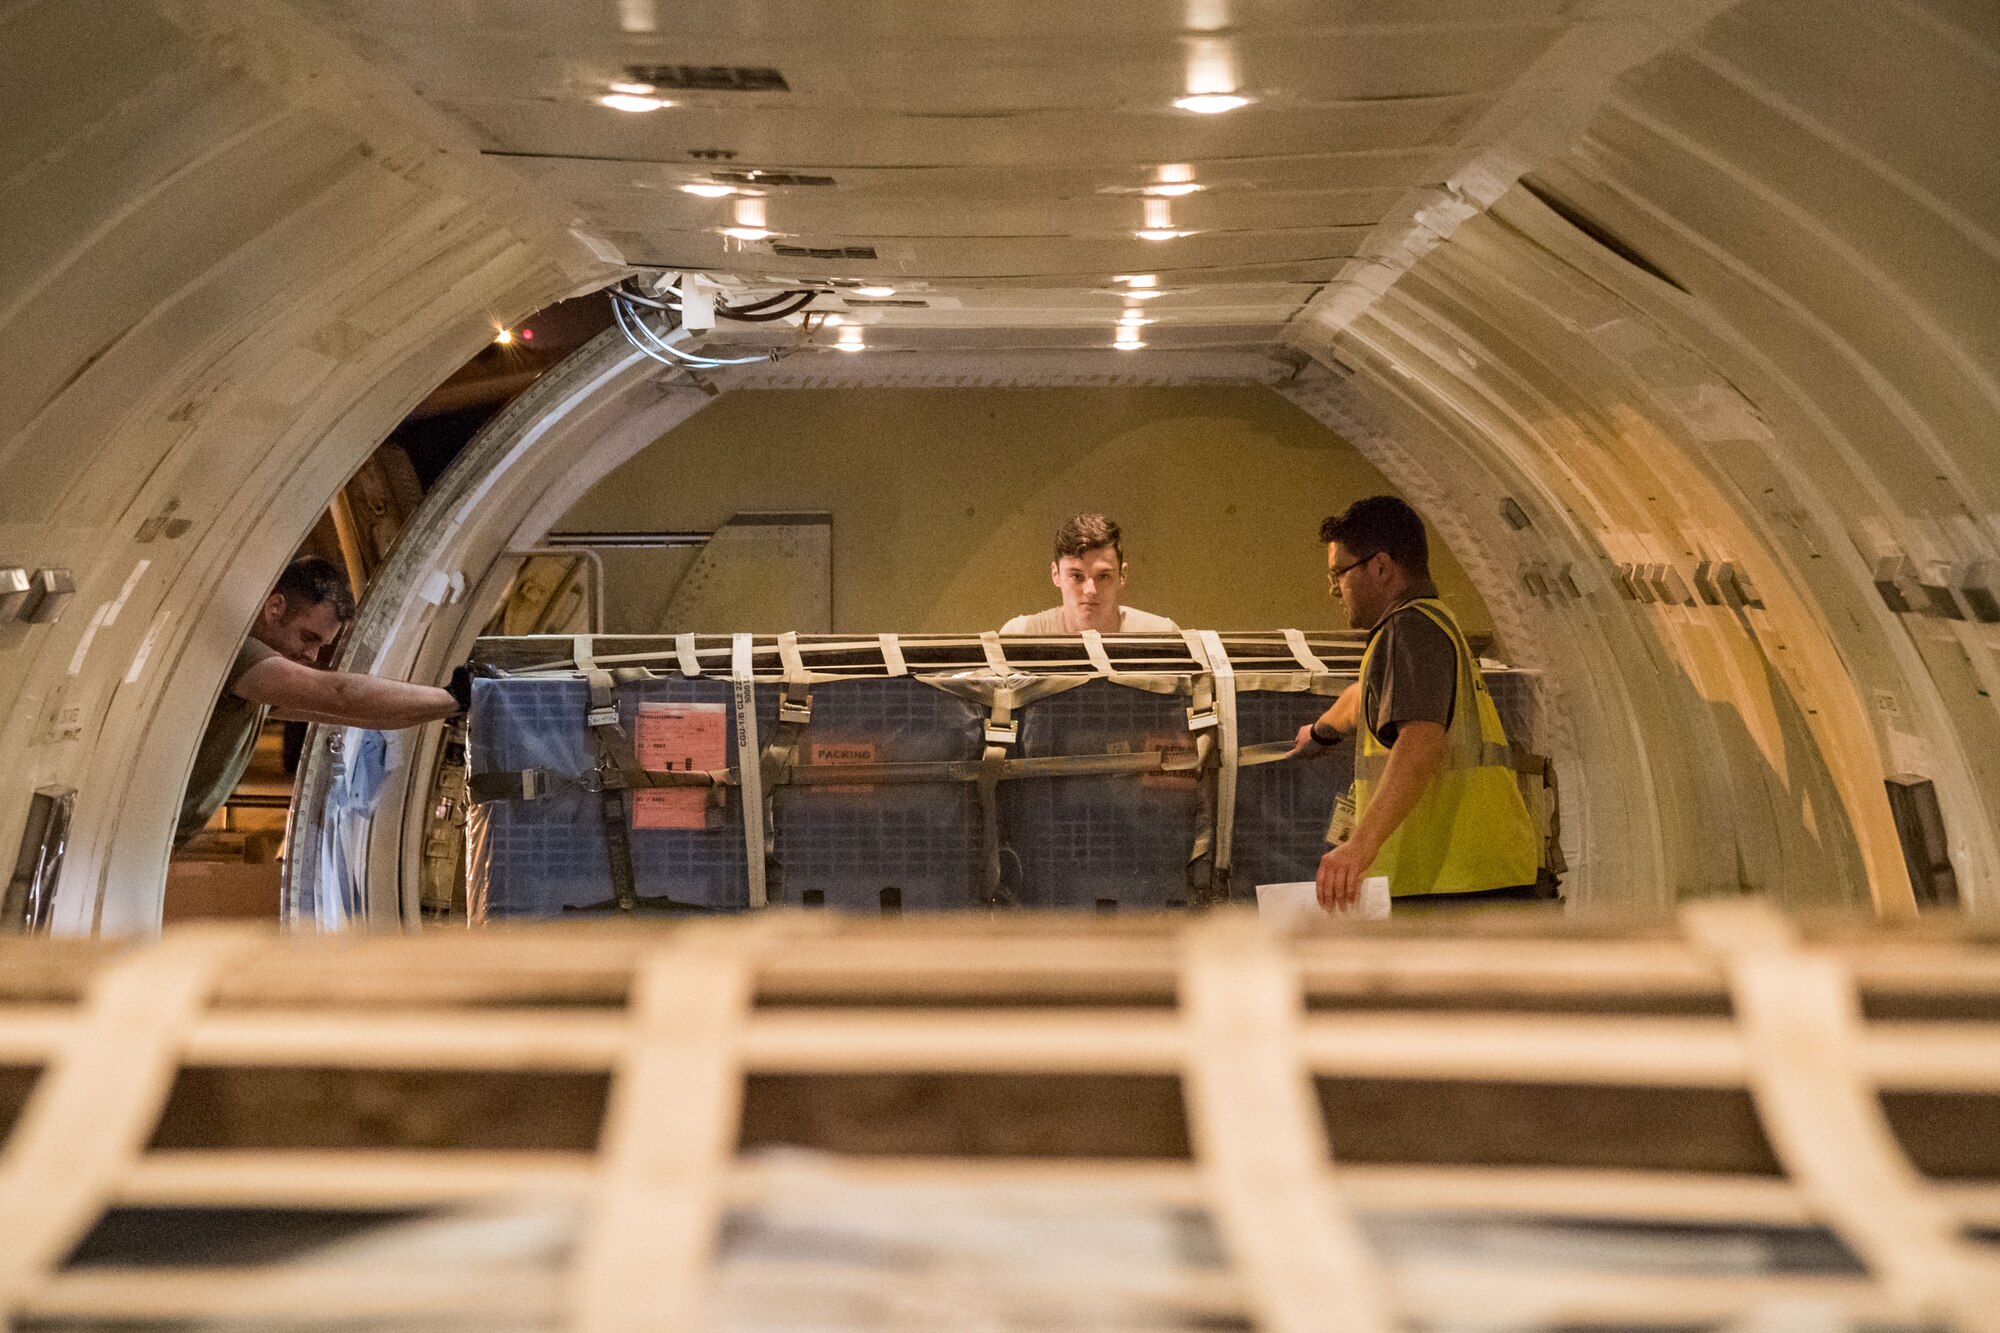 Brian McDonald, Air Transport International senior loadmaster, watches a pallet being loaded Sept. 8, 2019, at Dover Air Force Base, Del. The ATI aircraft, part of the Civil Reserve Air Fleet program, was contracted to transport cargo and 30 Team Dover members to Fairchild AFB, Wash., participating in Mobility Guardian 2019. “This mission is multidimensional and will provide a greater understanding of the commercial airlift capabilities and requirements across Air Mobility Command and the commercial airlift enterprise,” said Maj. Adam Crane, AMC Headquarters CRAF Branch Chief, Scott AFB, Ill. (U.S. Air Force photo by Roland Balik)